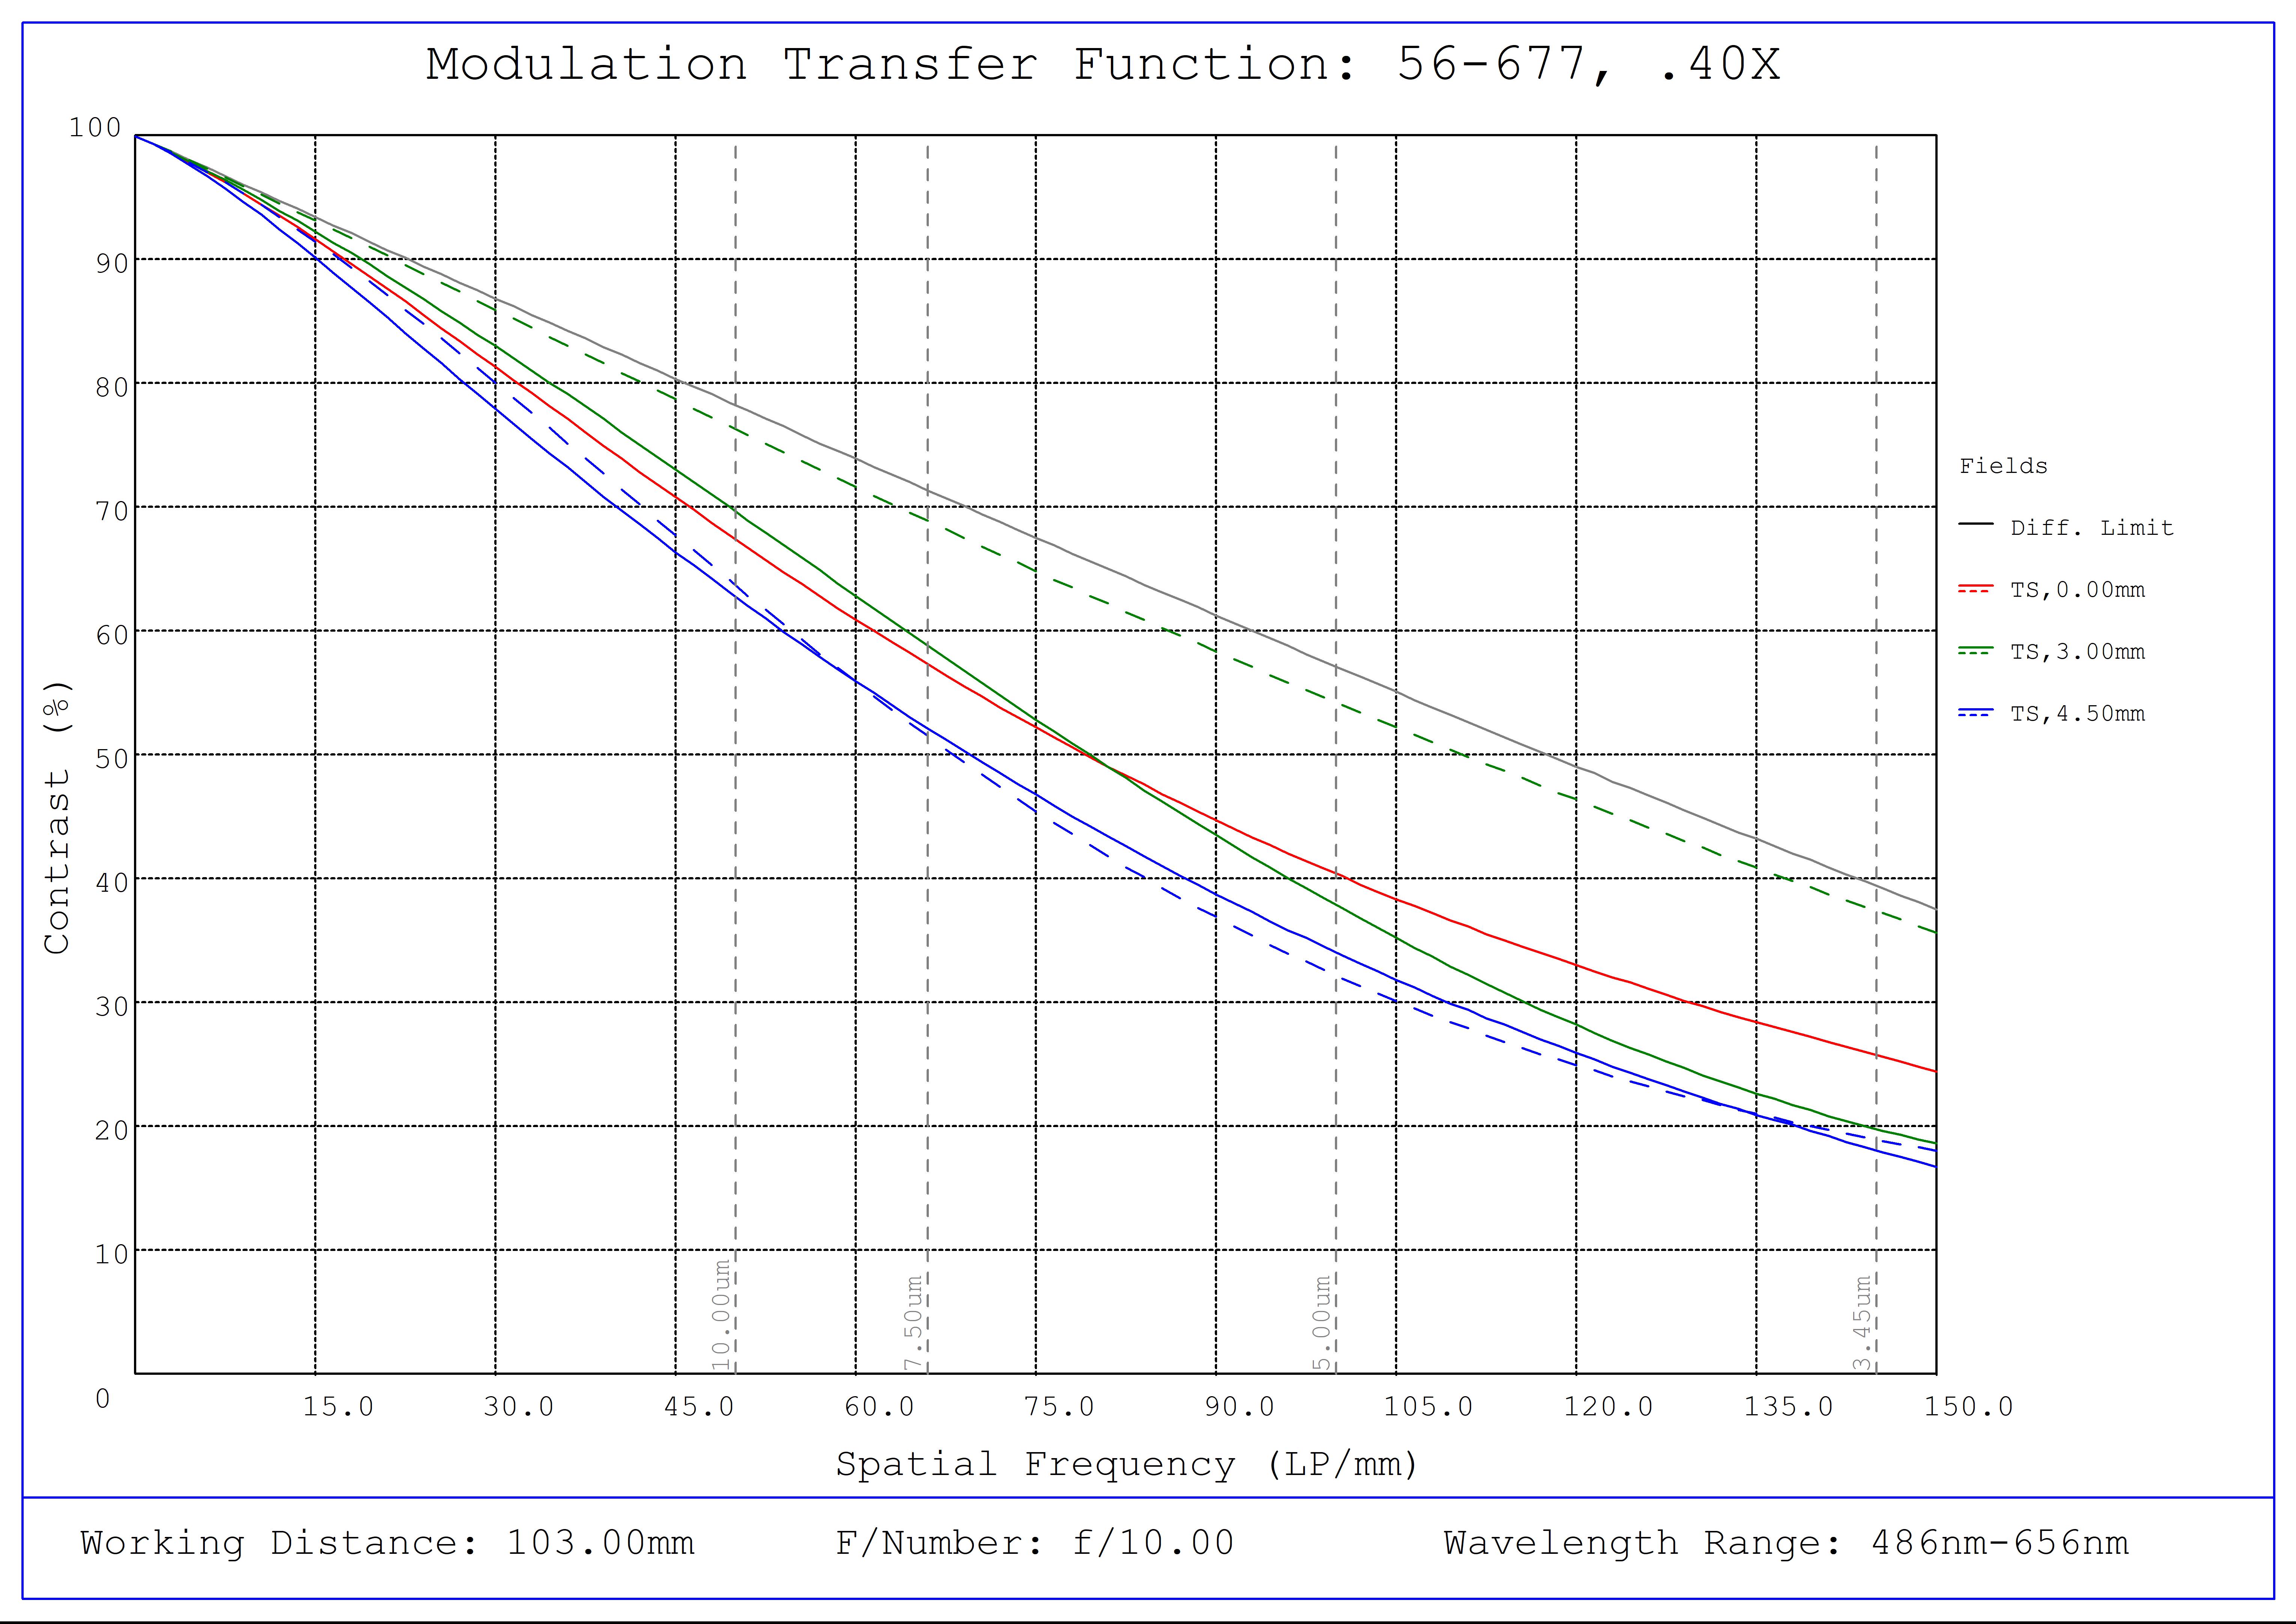 #56-677, 0.40X SilverTL™ Telecentric Lens, Modulated Transfer Function (MTF) Plot, 103mm Working Distance, f10